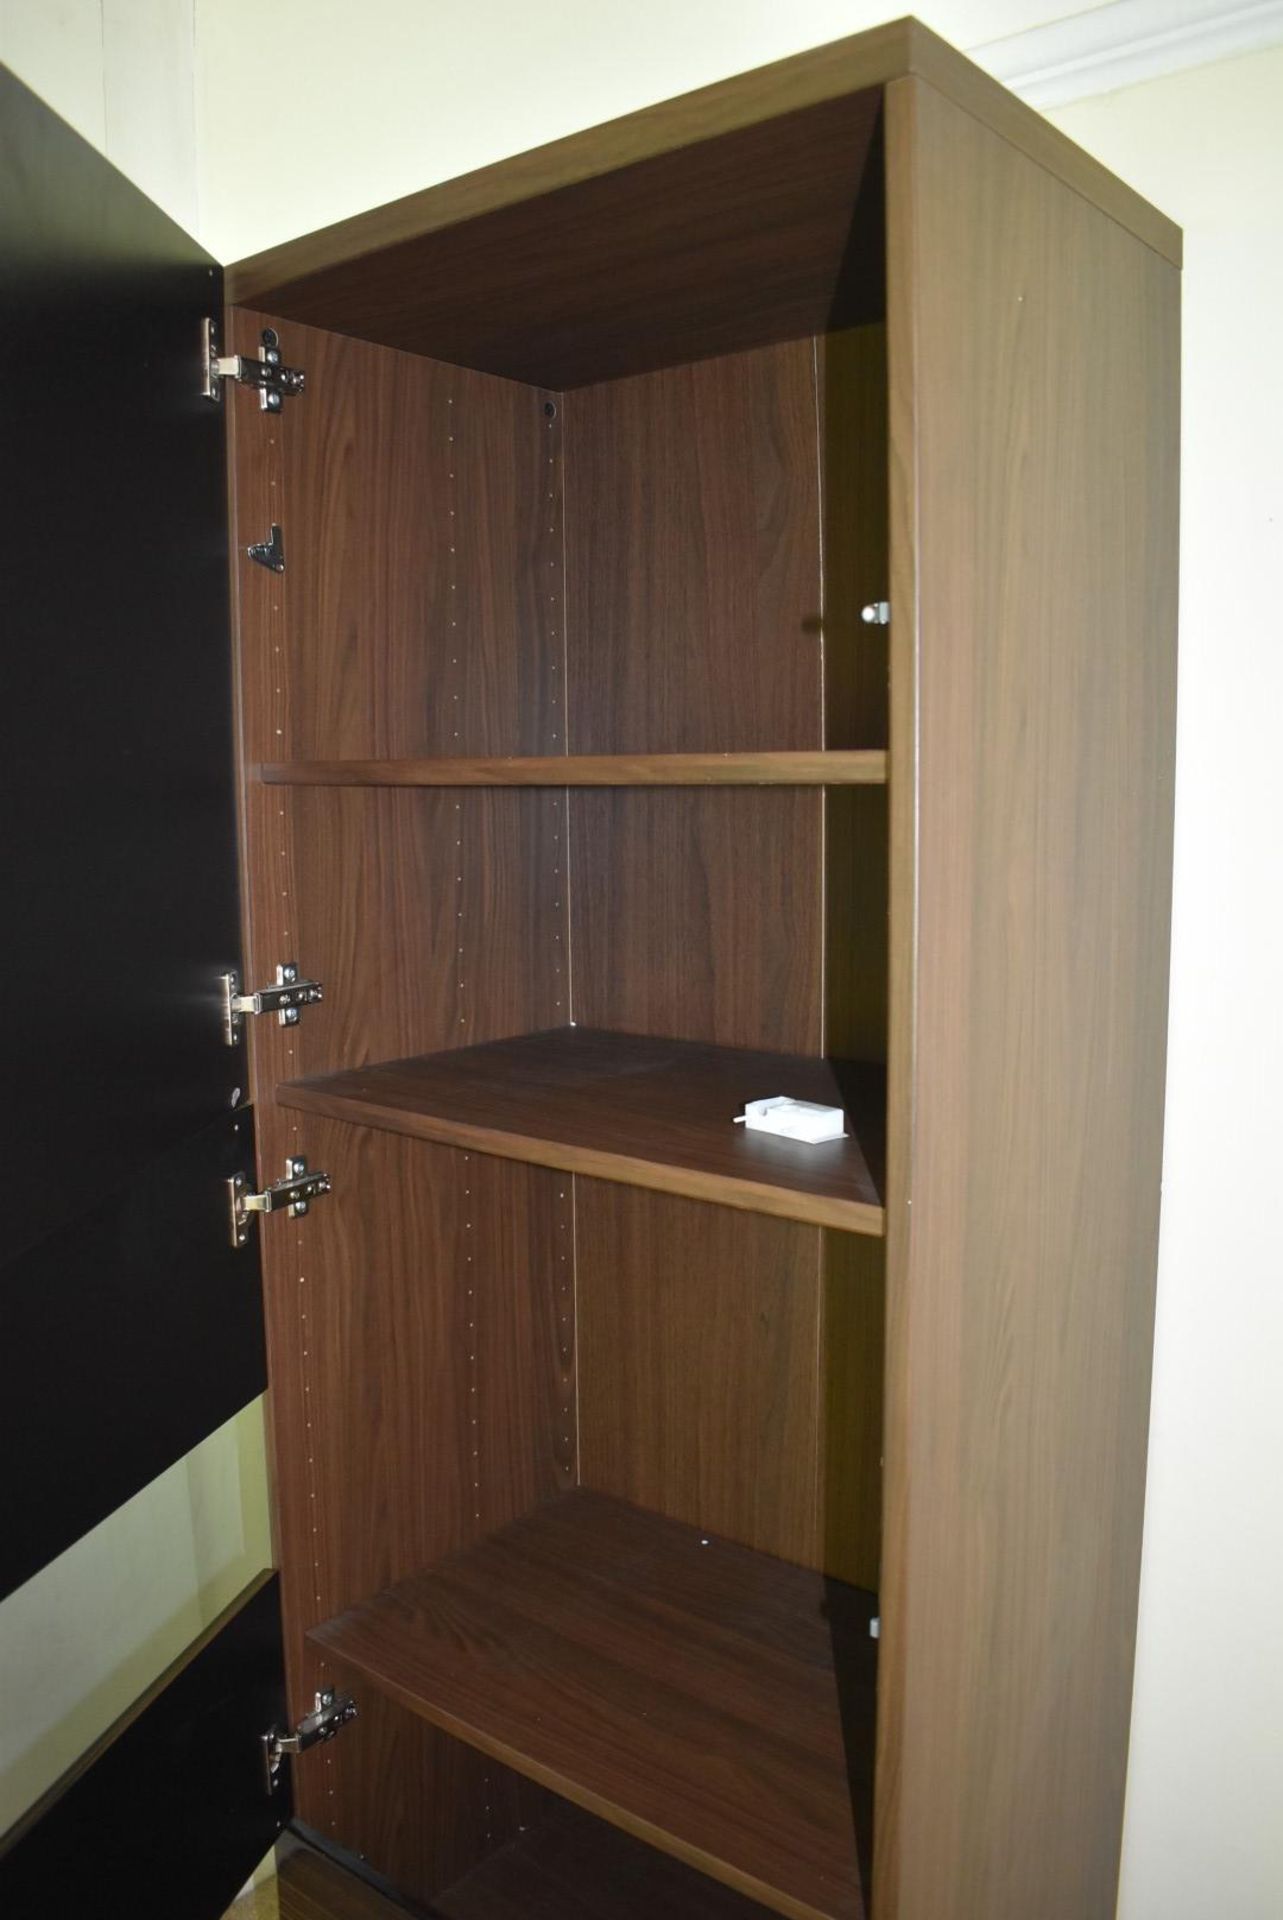 1 x Upright Storage Cabinet With Zebrano Wood Doors - No VAT On The Hammer - CL999 - Location: - Image 4 of 6